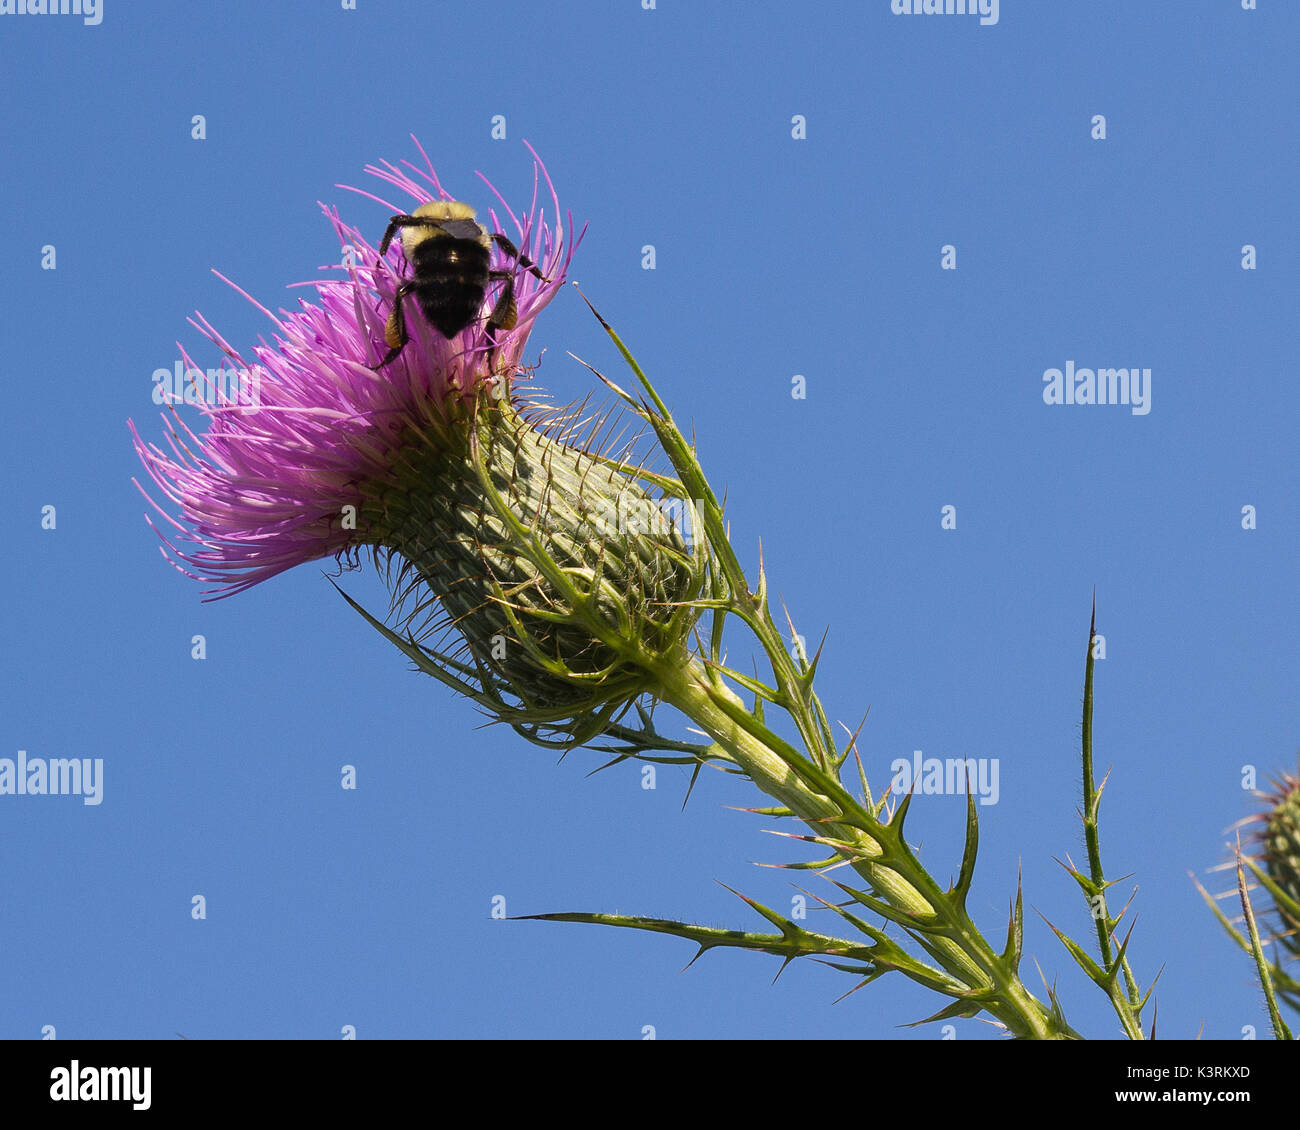 Large Bumble Bee with flower Stock Photo